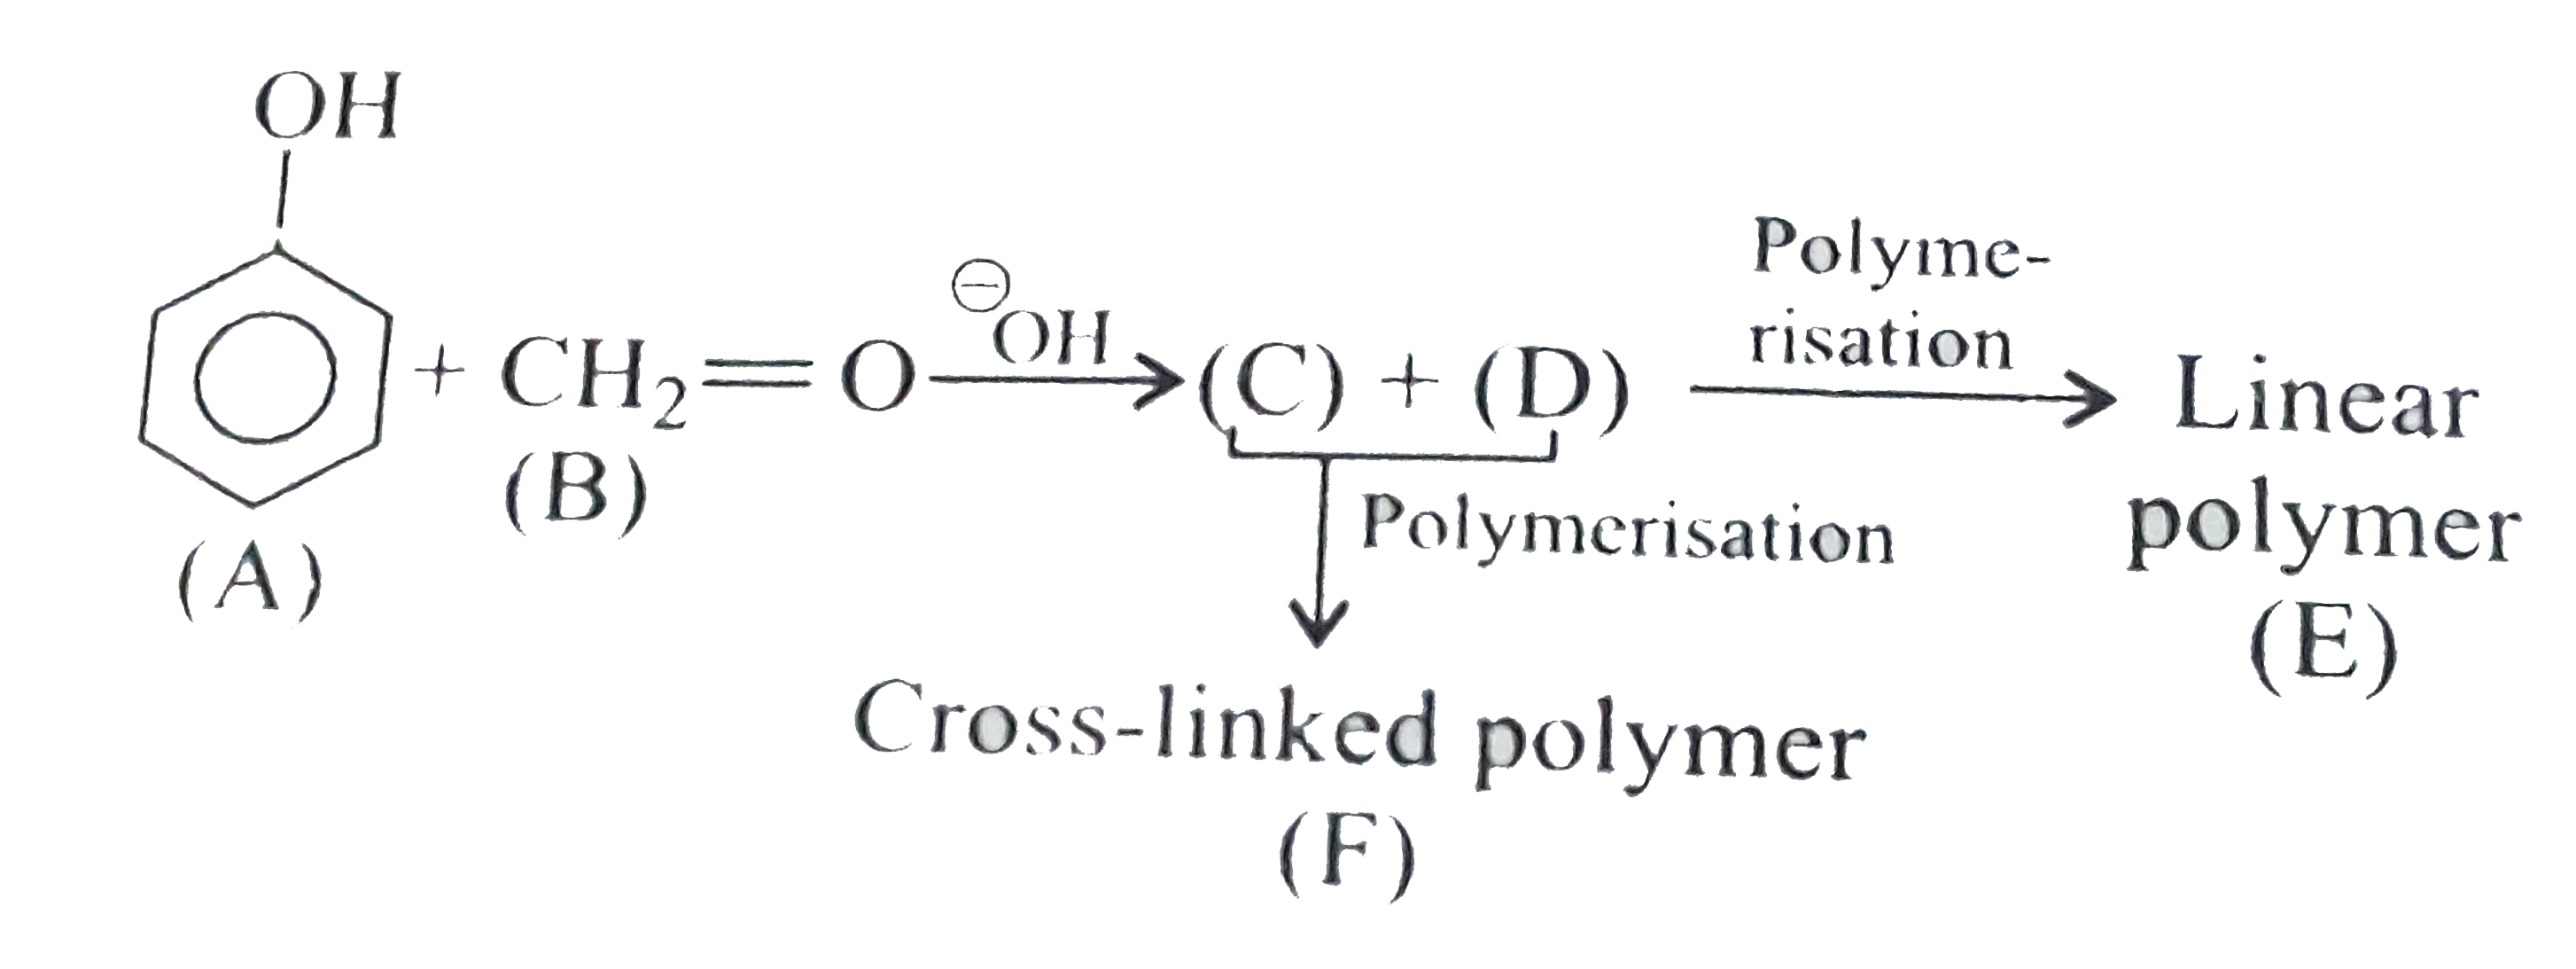 The linear polymer(E)is formed is: